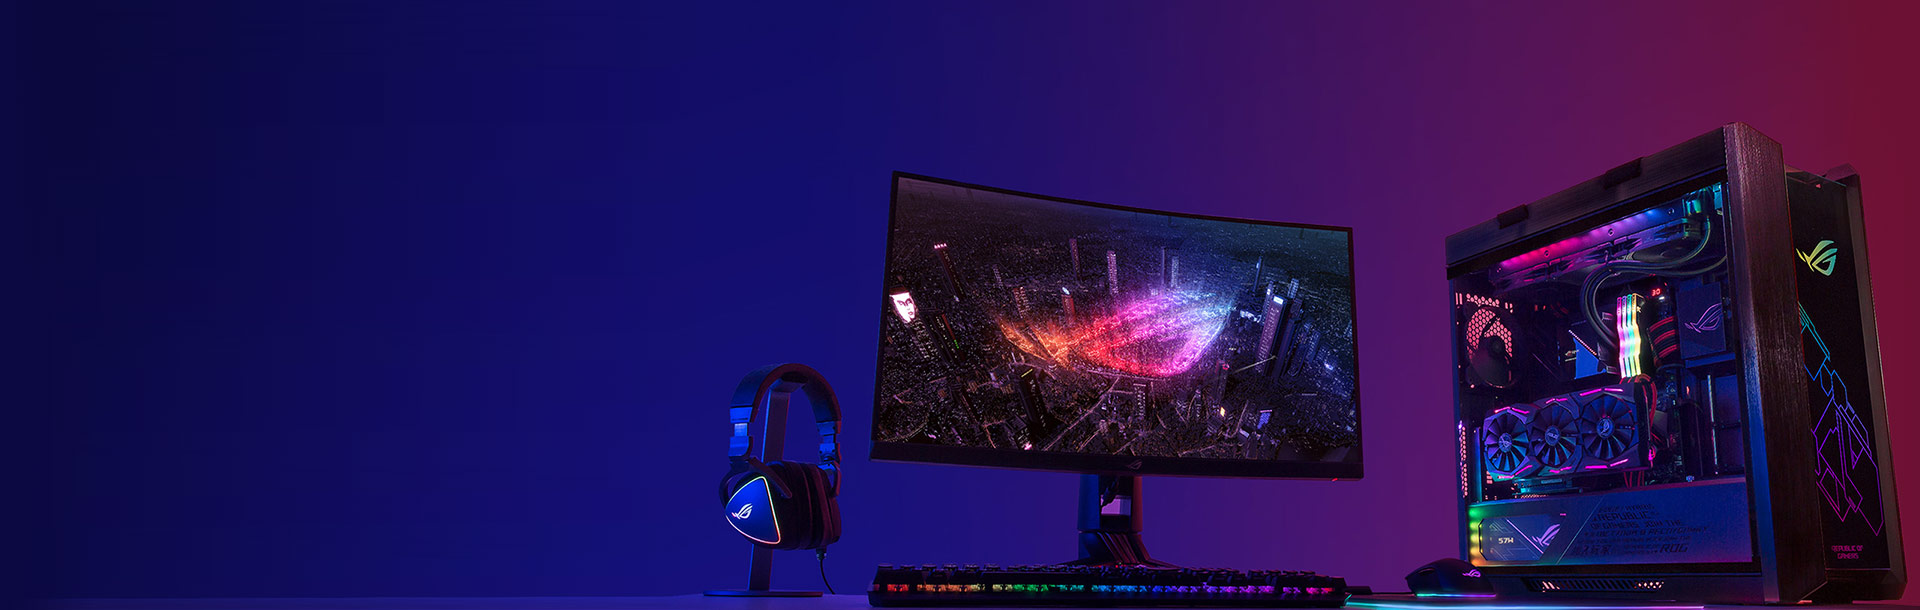 Gaming setup featuring ROG Strix products and RGB lighting